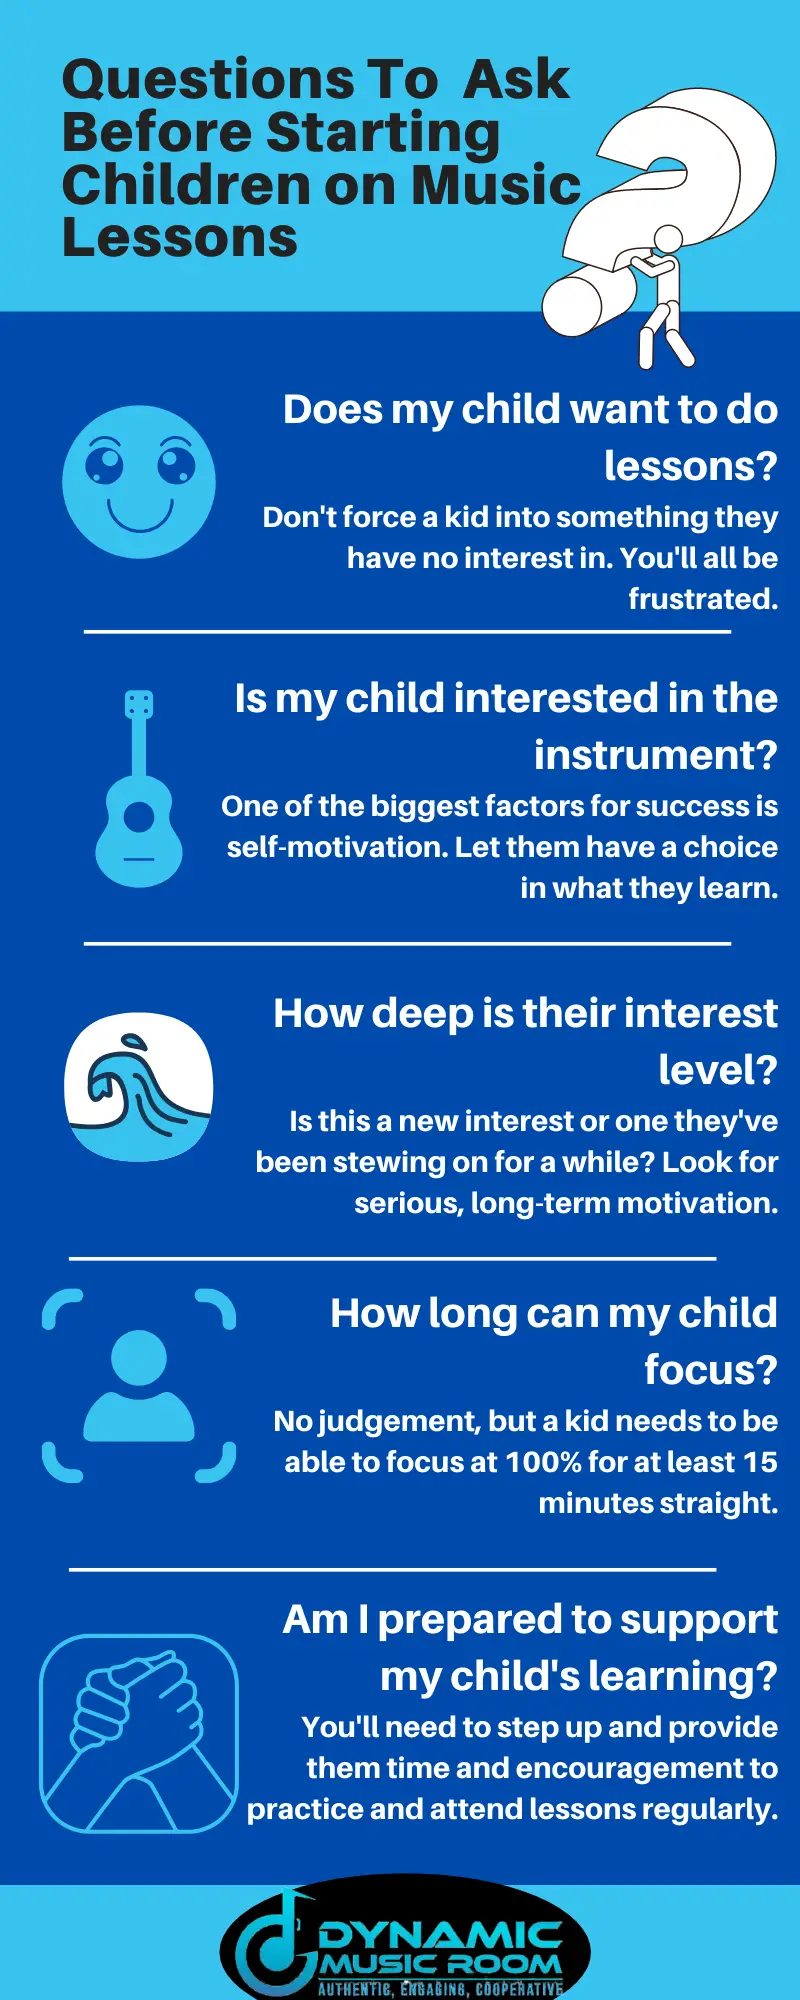 image questions to ask before starting a child on music lessons infographic 